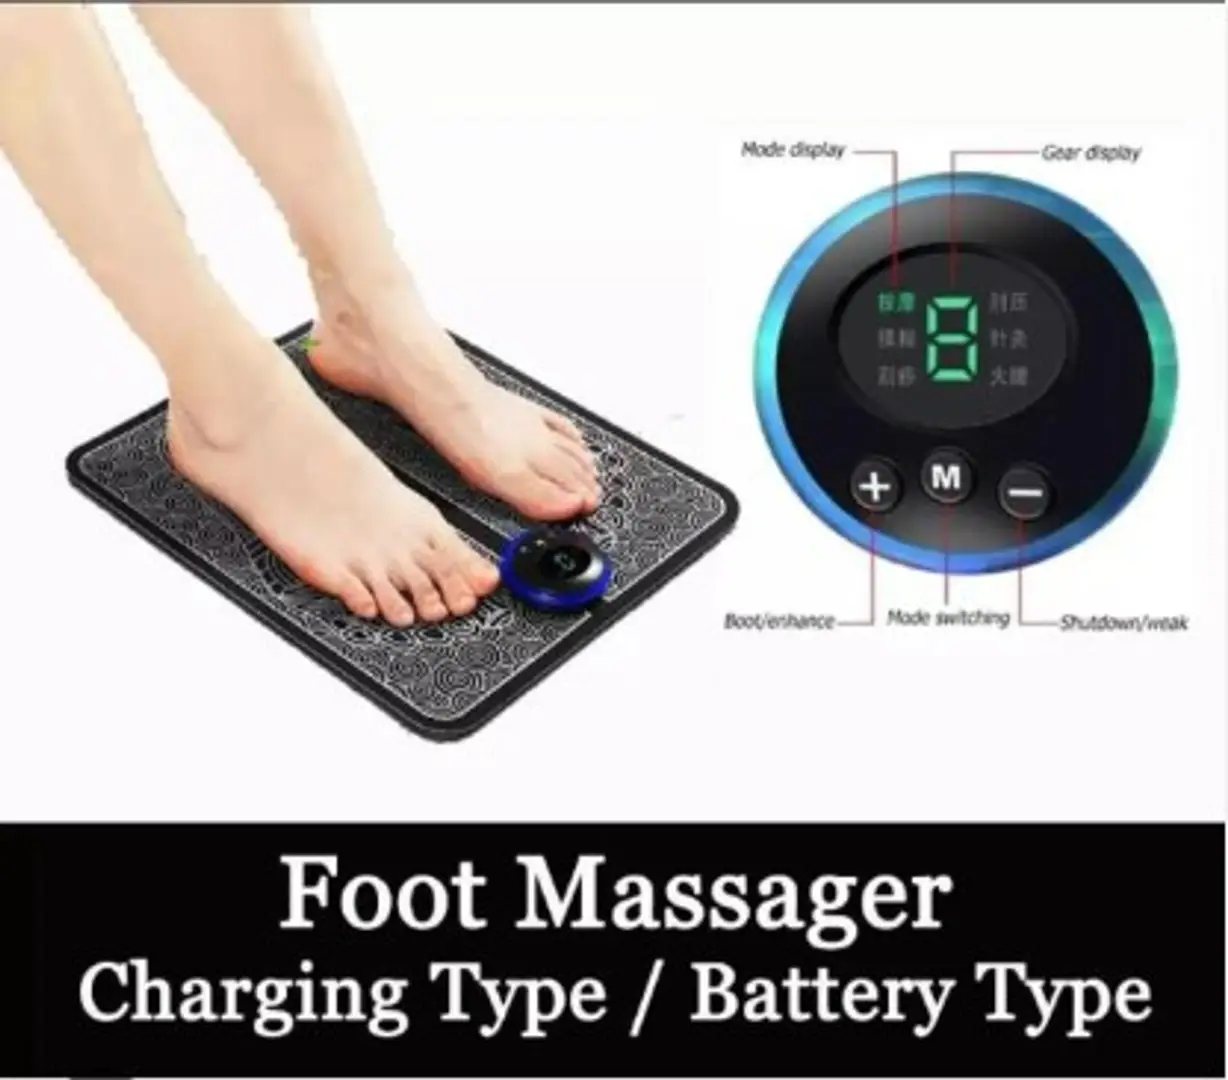 Buy EMS FOOT MASSAGER,Electric Foot Massage Pad, USB Rechargeable Foot ...